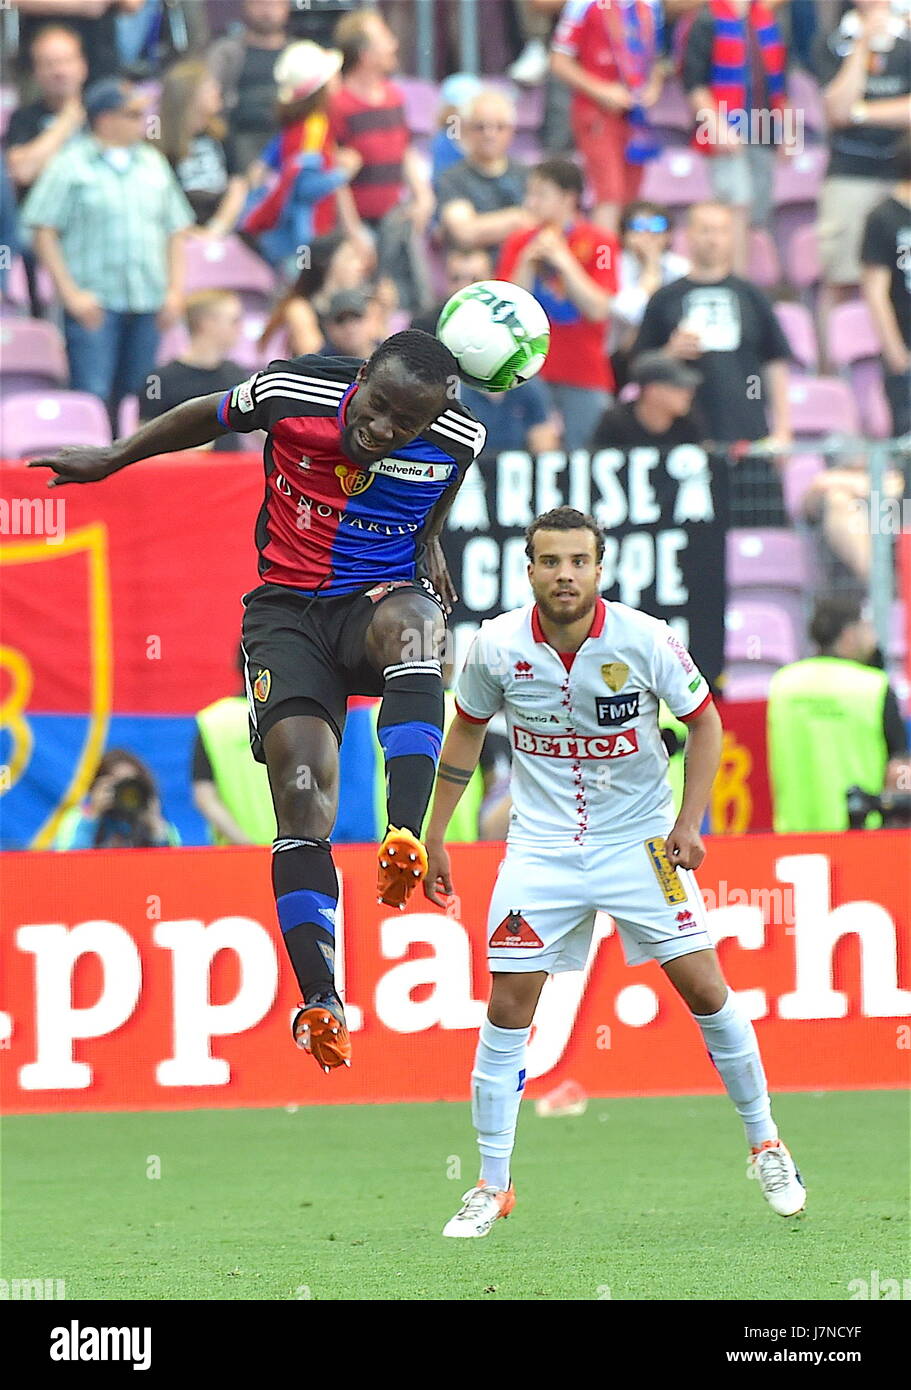 Genève, 25.05.2017, Football Helvetia Swiss Cup Final, FC Bâle 1893 - FC  Sion, Seydou Doumbia (FC Bale 88) duel with Nicolas Luchinger (FC Sion 50)  Photo: Cronos/Frederic Dubuis Stock Photo - Alamy